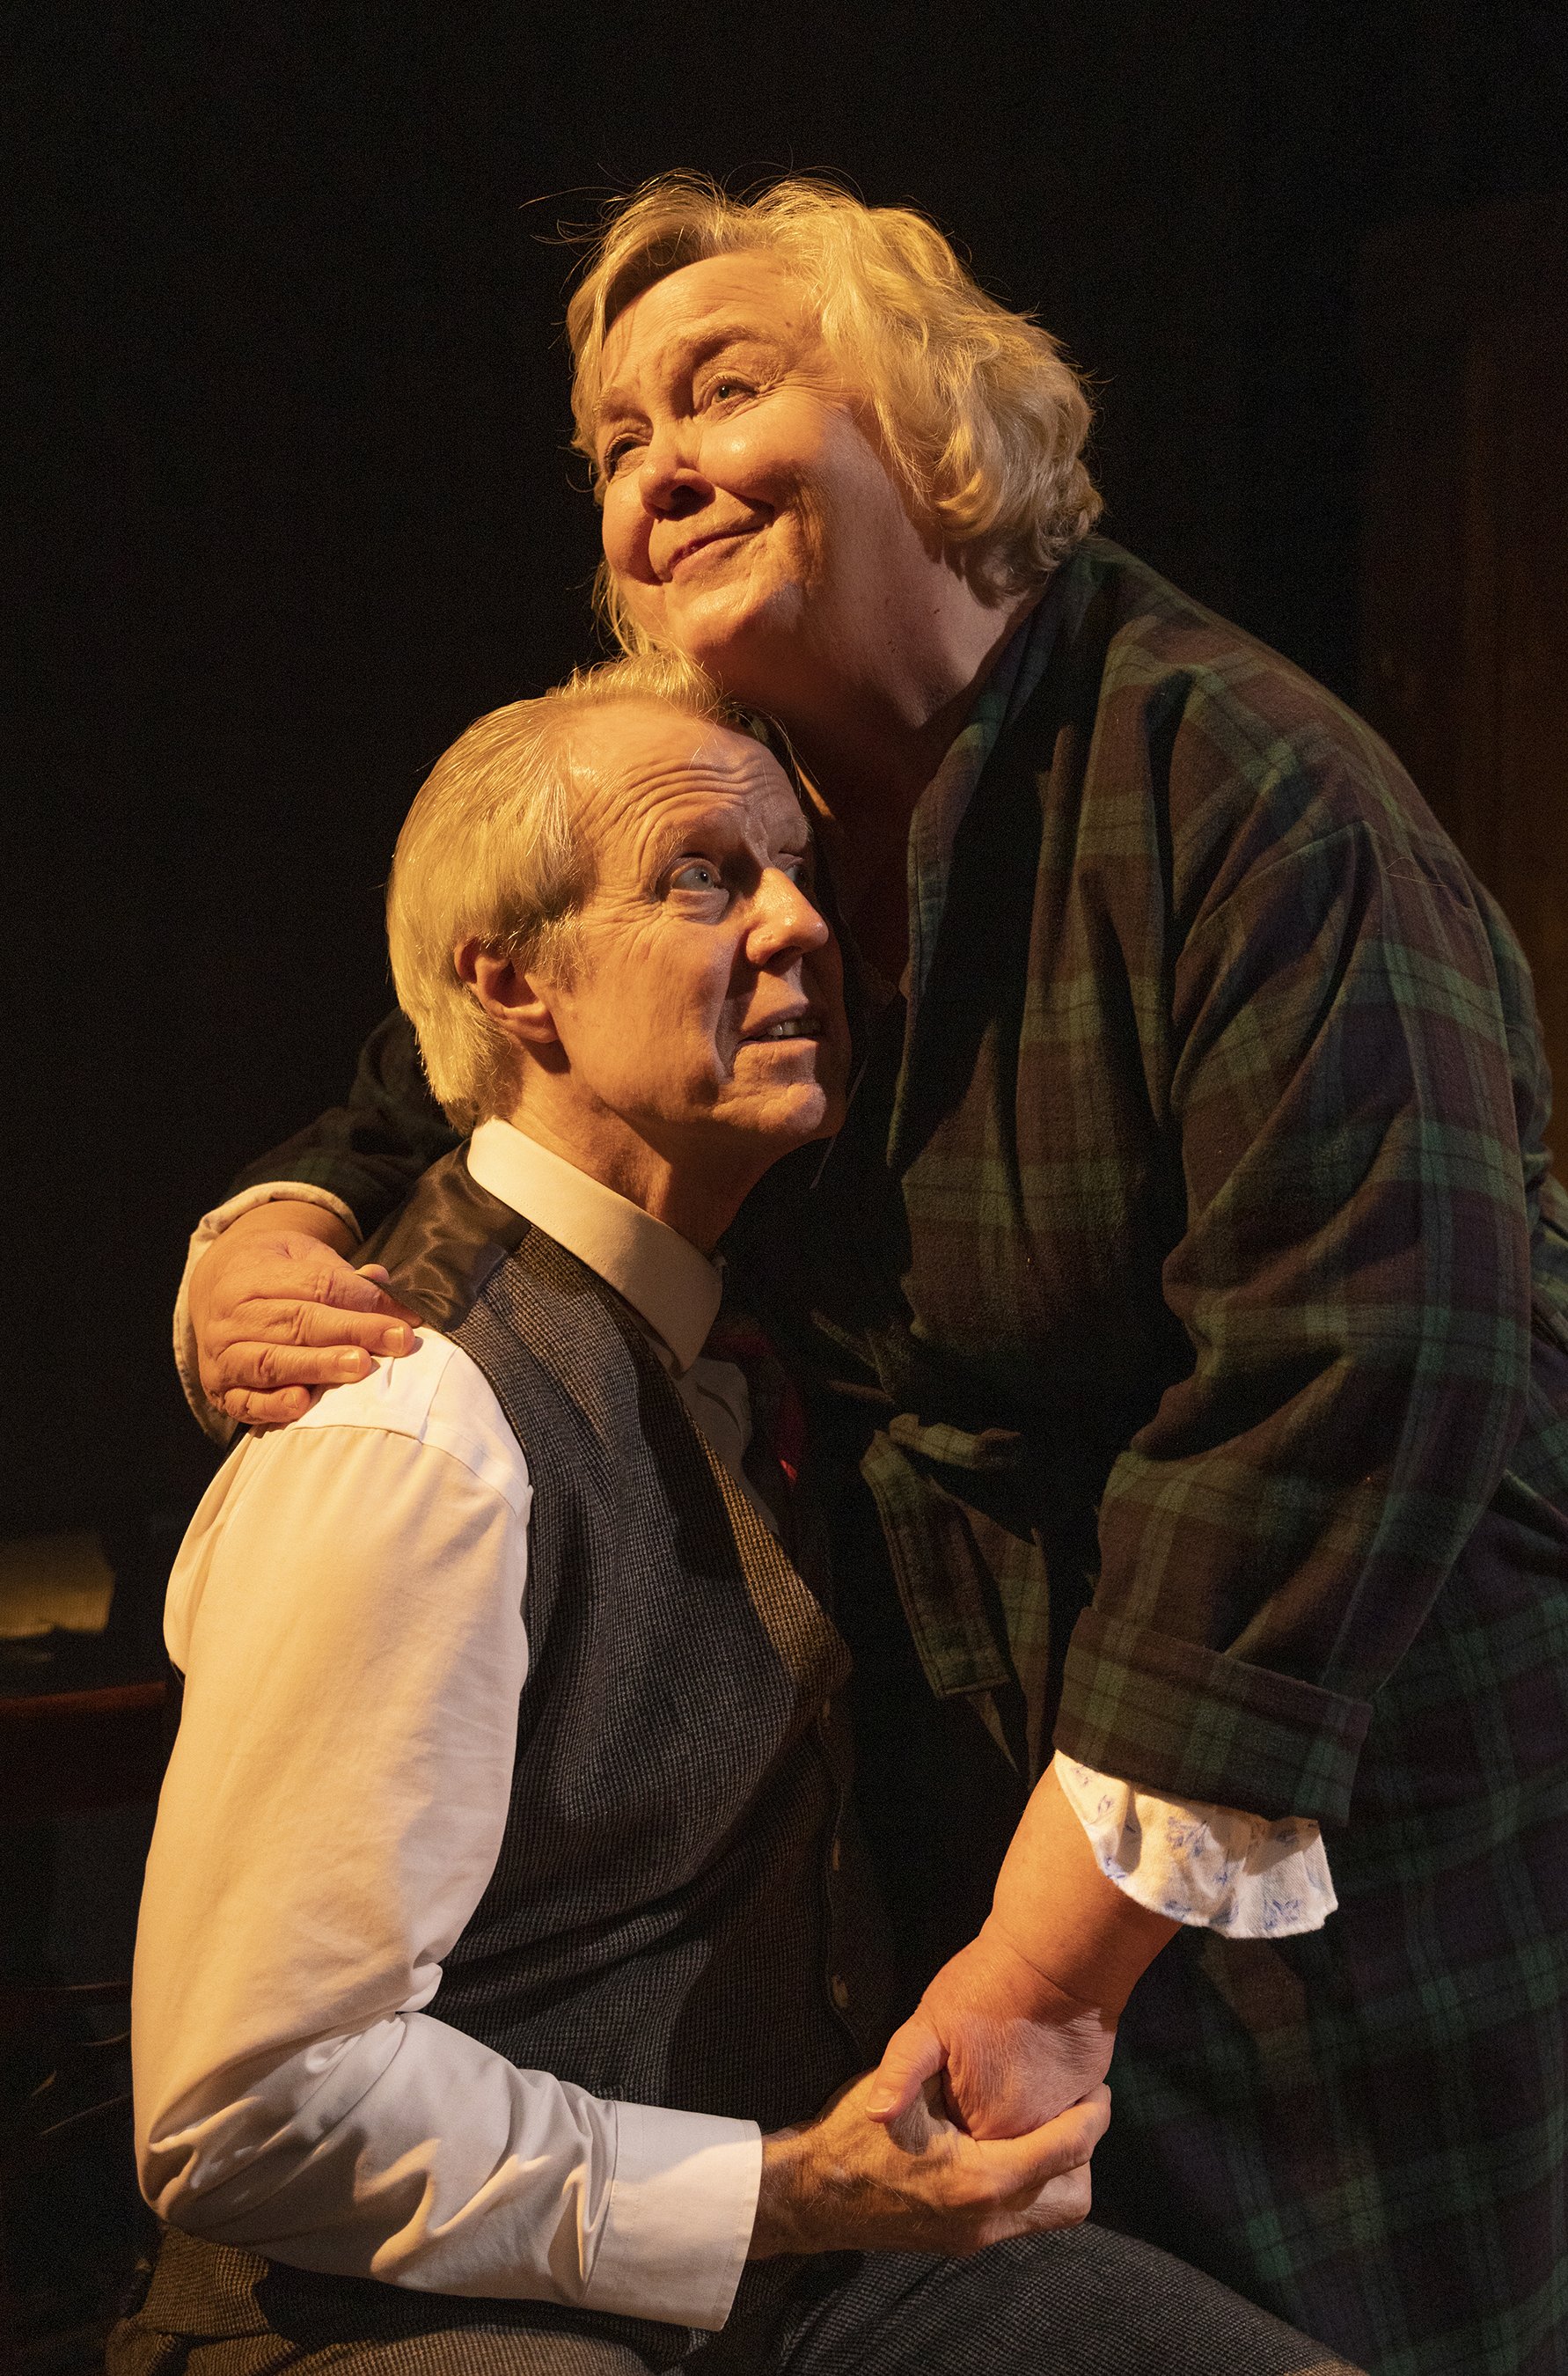 Joseph McGrath as Willy Loman and Cynthia Meier as Linda. Photo by Tim Fuller.